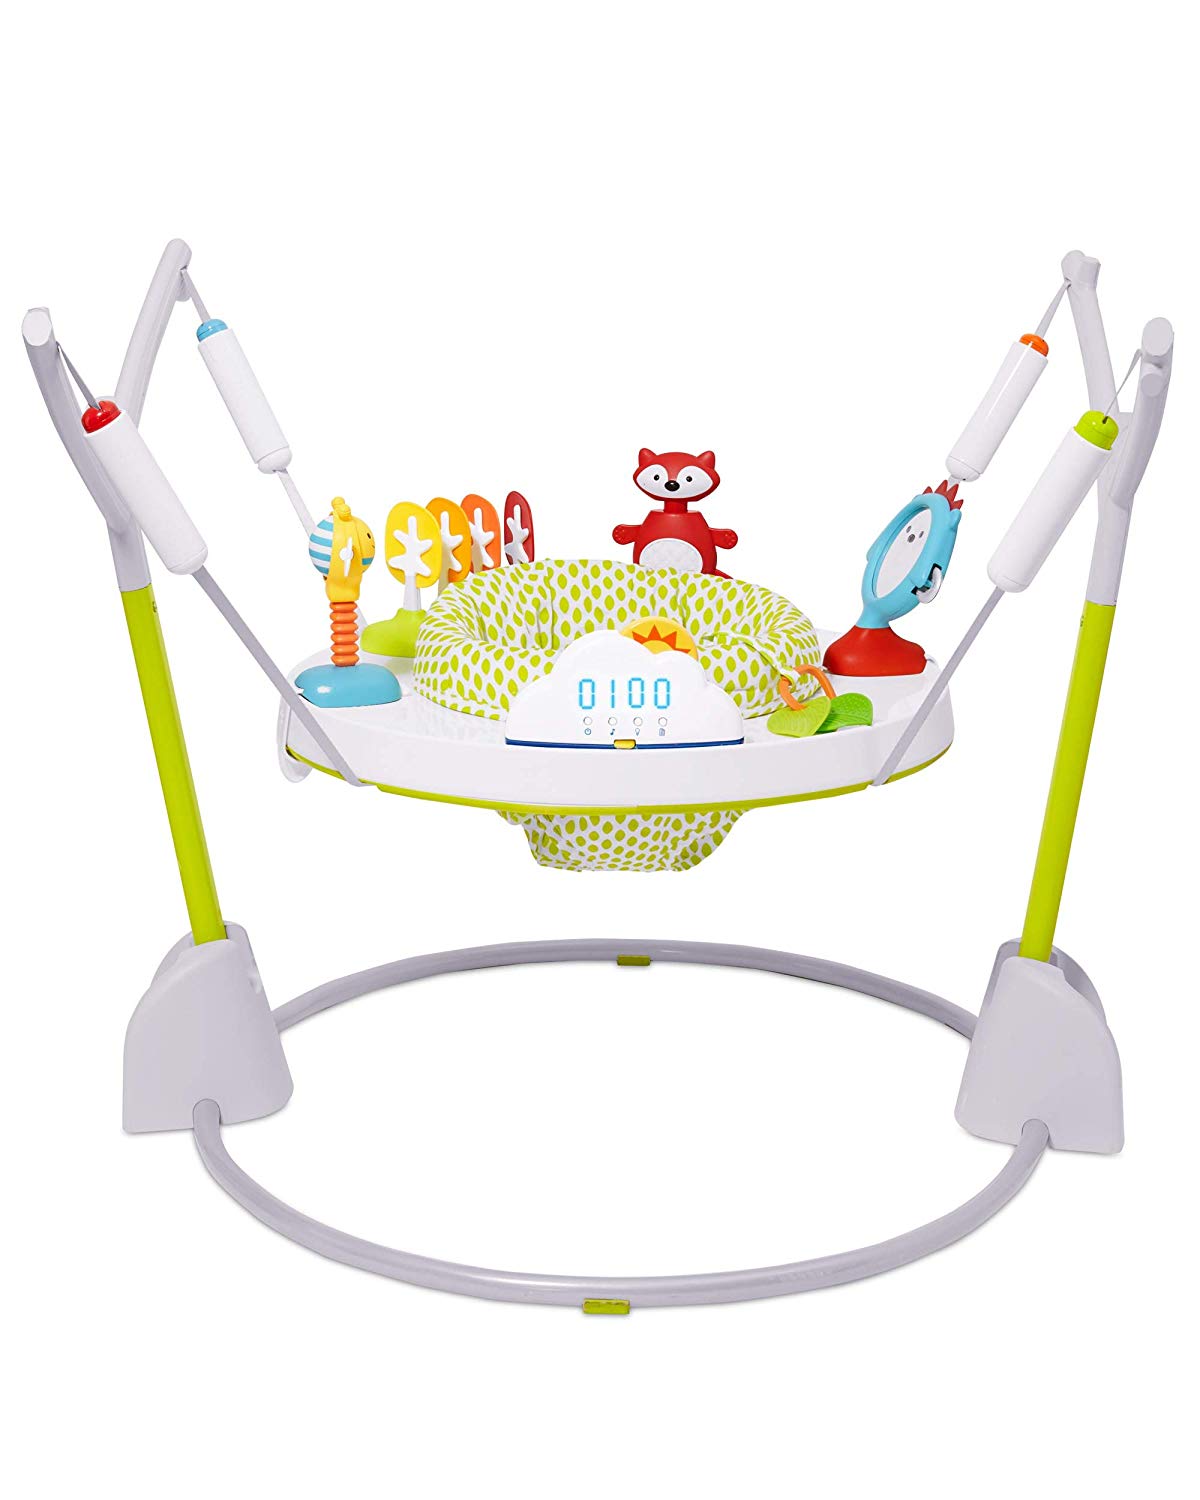 Skip Hop Explore and More, 3 Step Activity Centre With Seat & Table for Babies’ and Kids’ Development, Multi-Coloured multicoloured